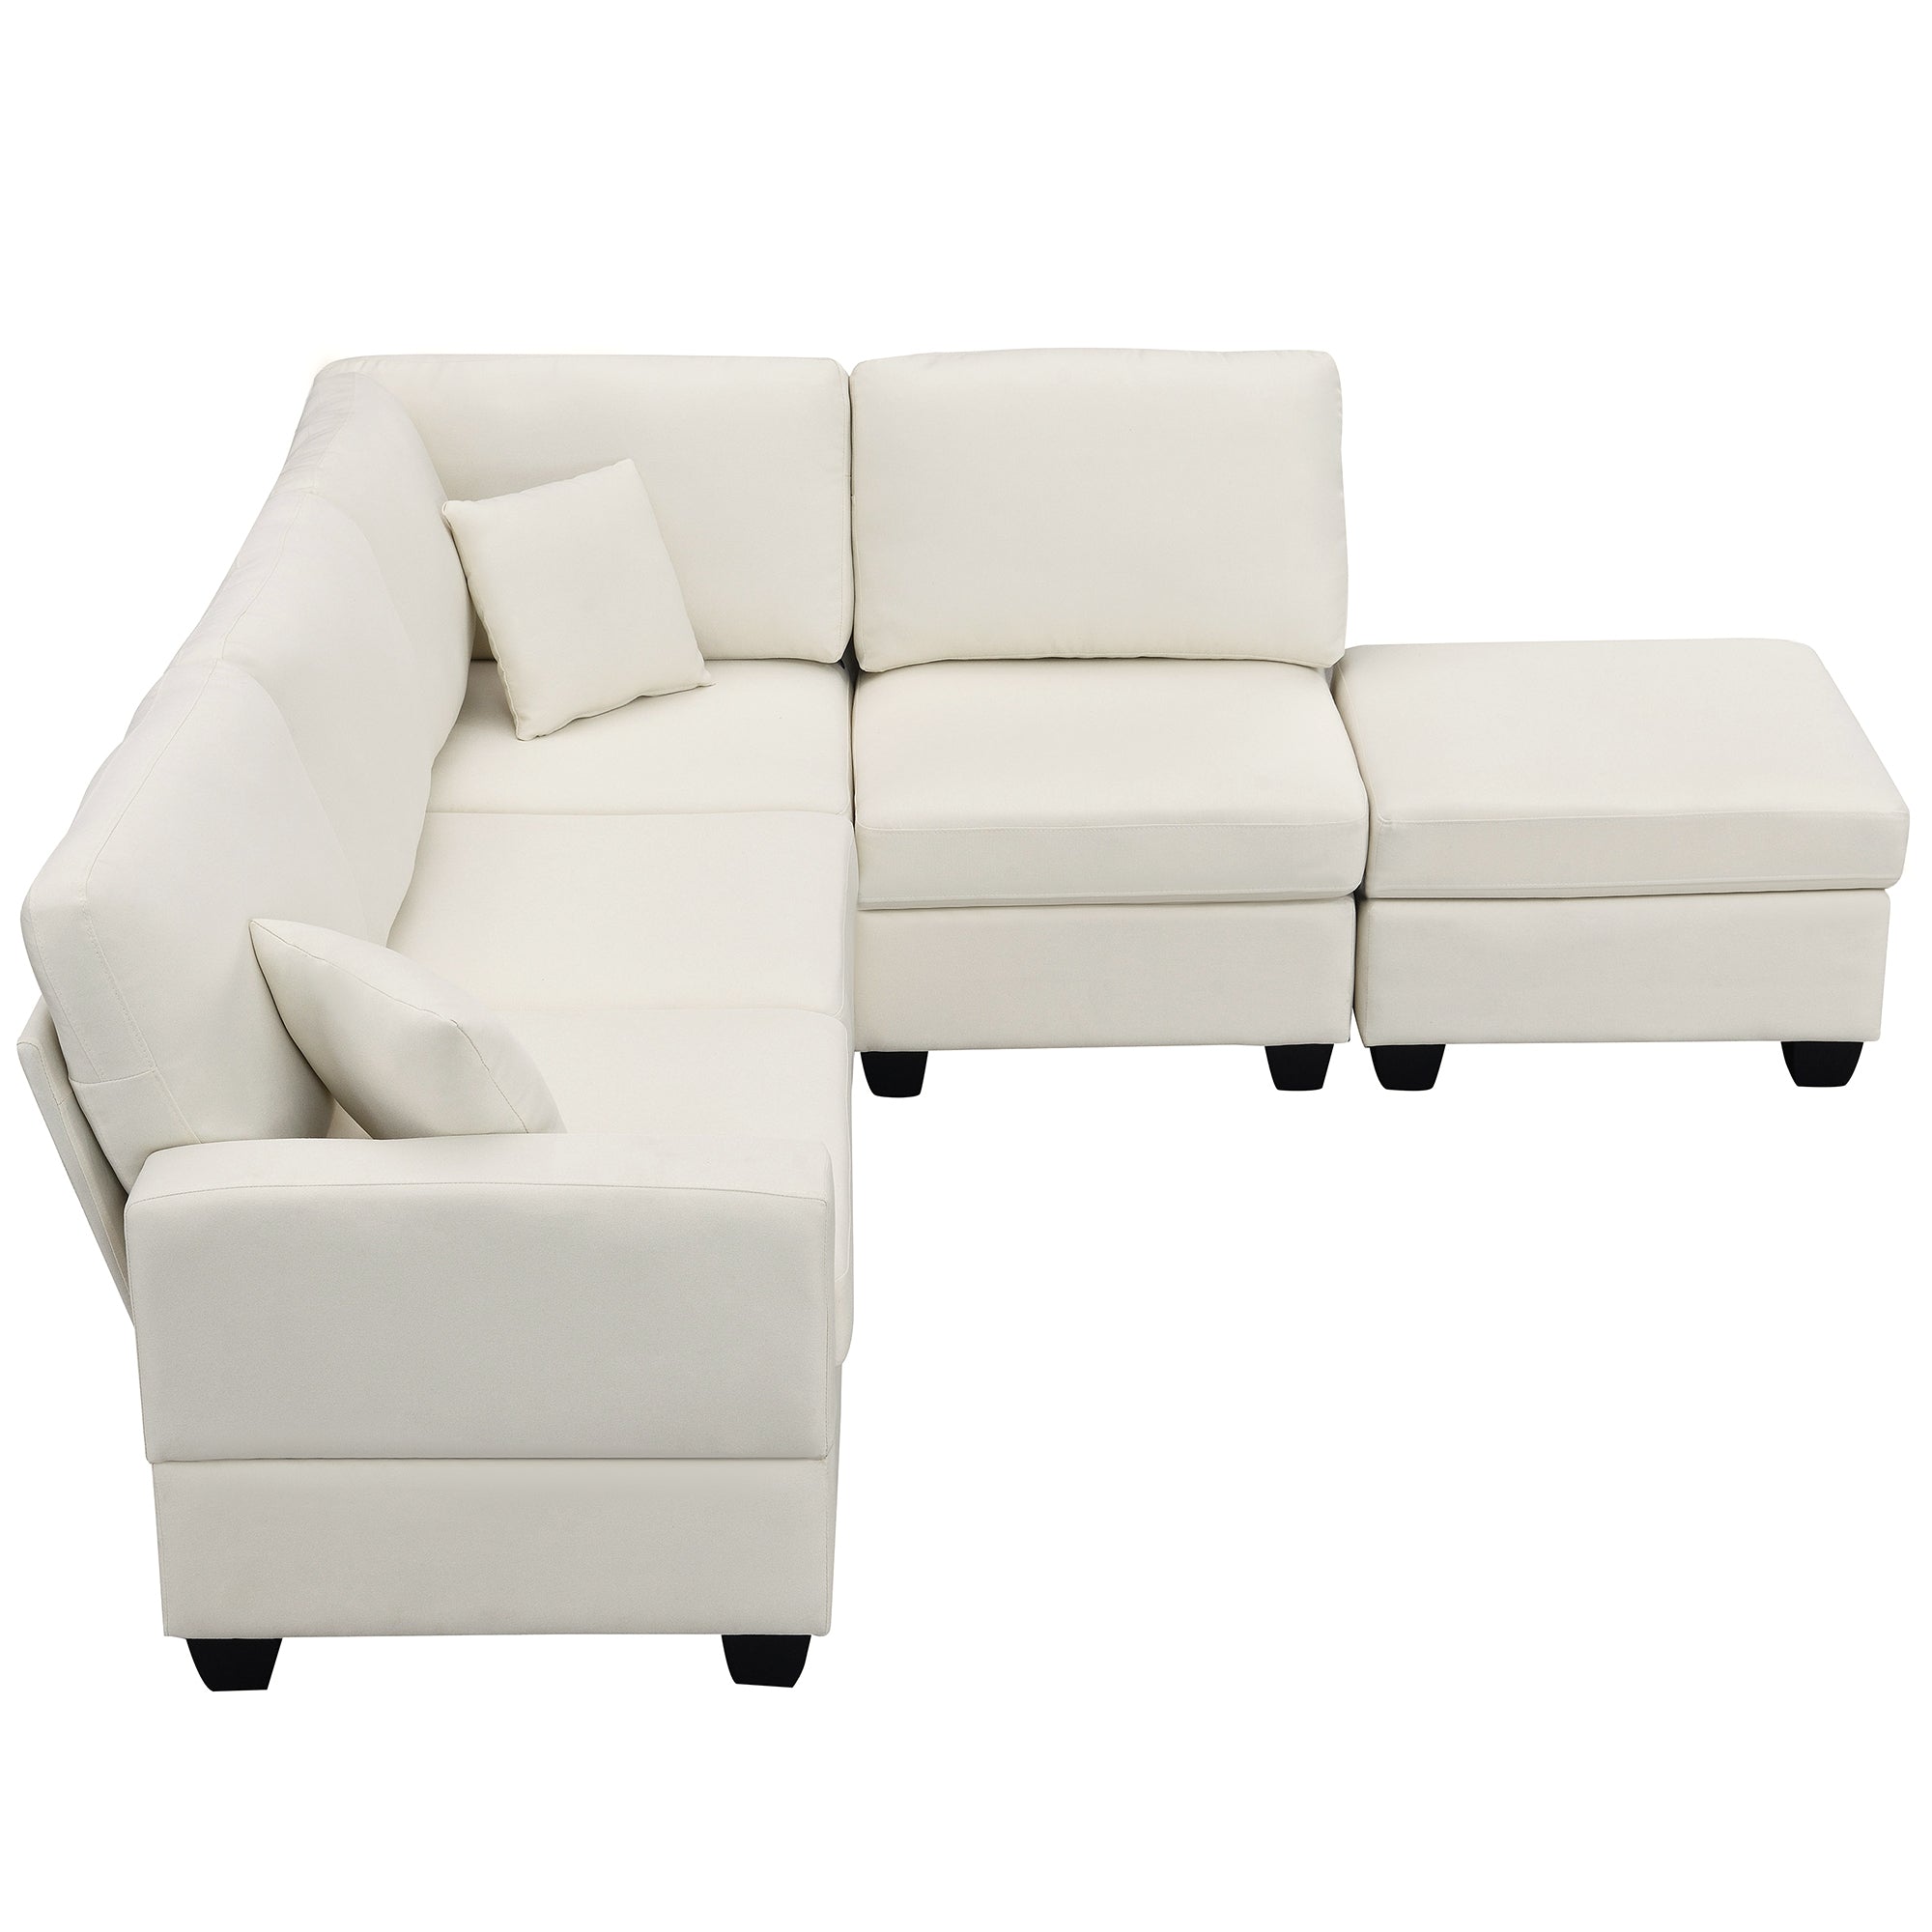 Linen L-Shaped Sectional Sofa with Convertible Ottoman – Beige-Stationary Sectionals-American Furniture Outlet